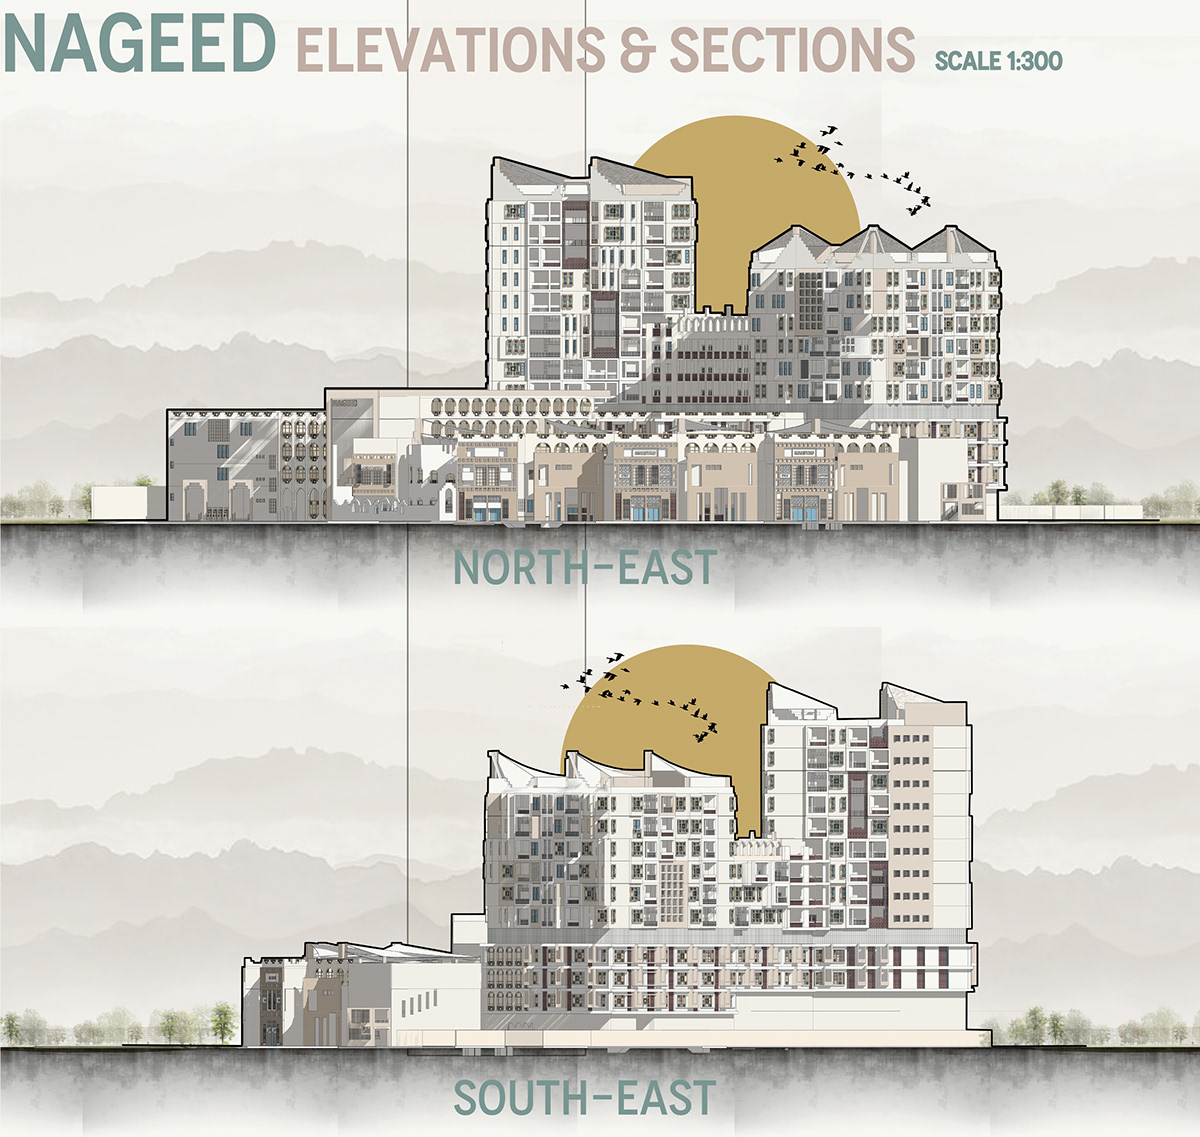 NAGEED ELEVATIONS
